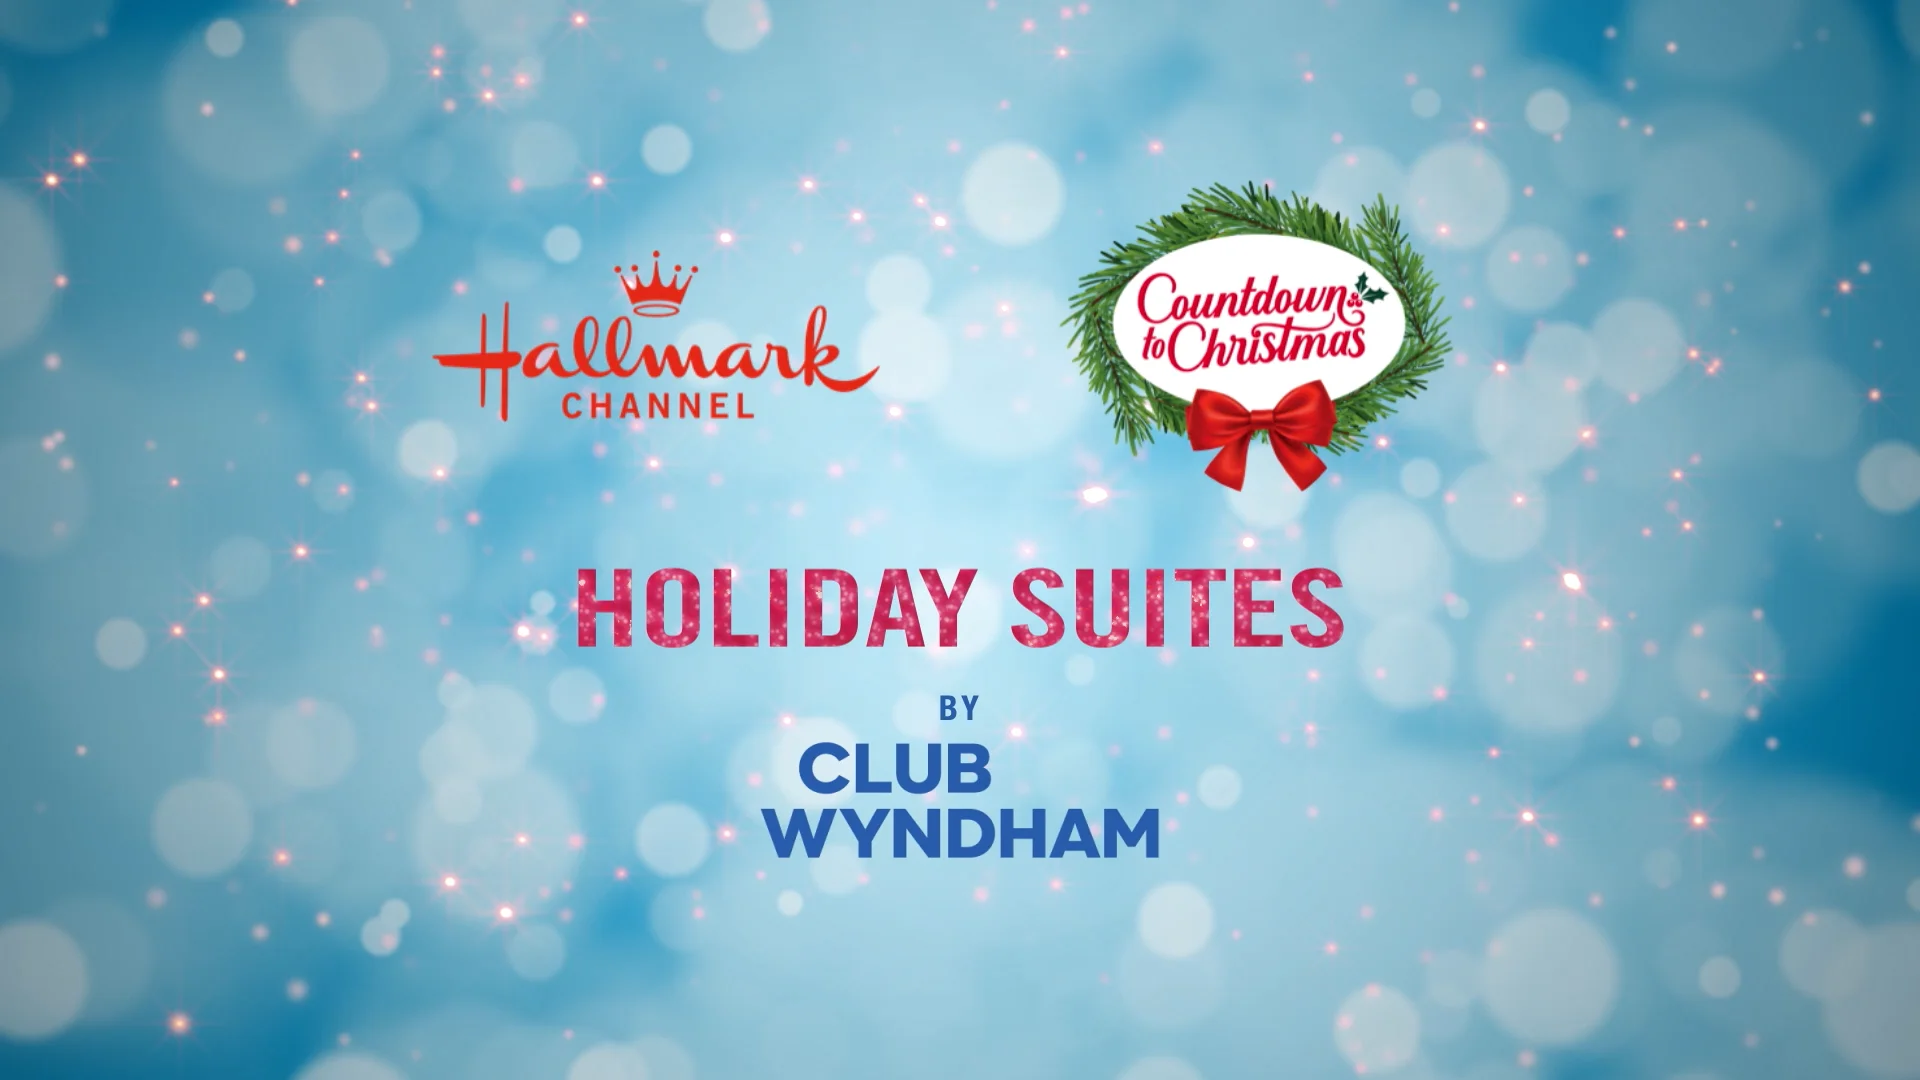 Introducing: Hallmark Channel's Countdown to Christmas Holiday